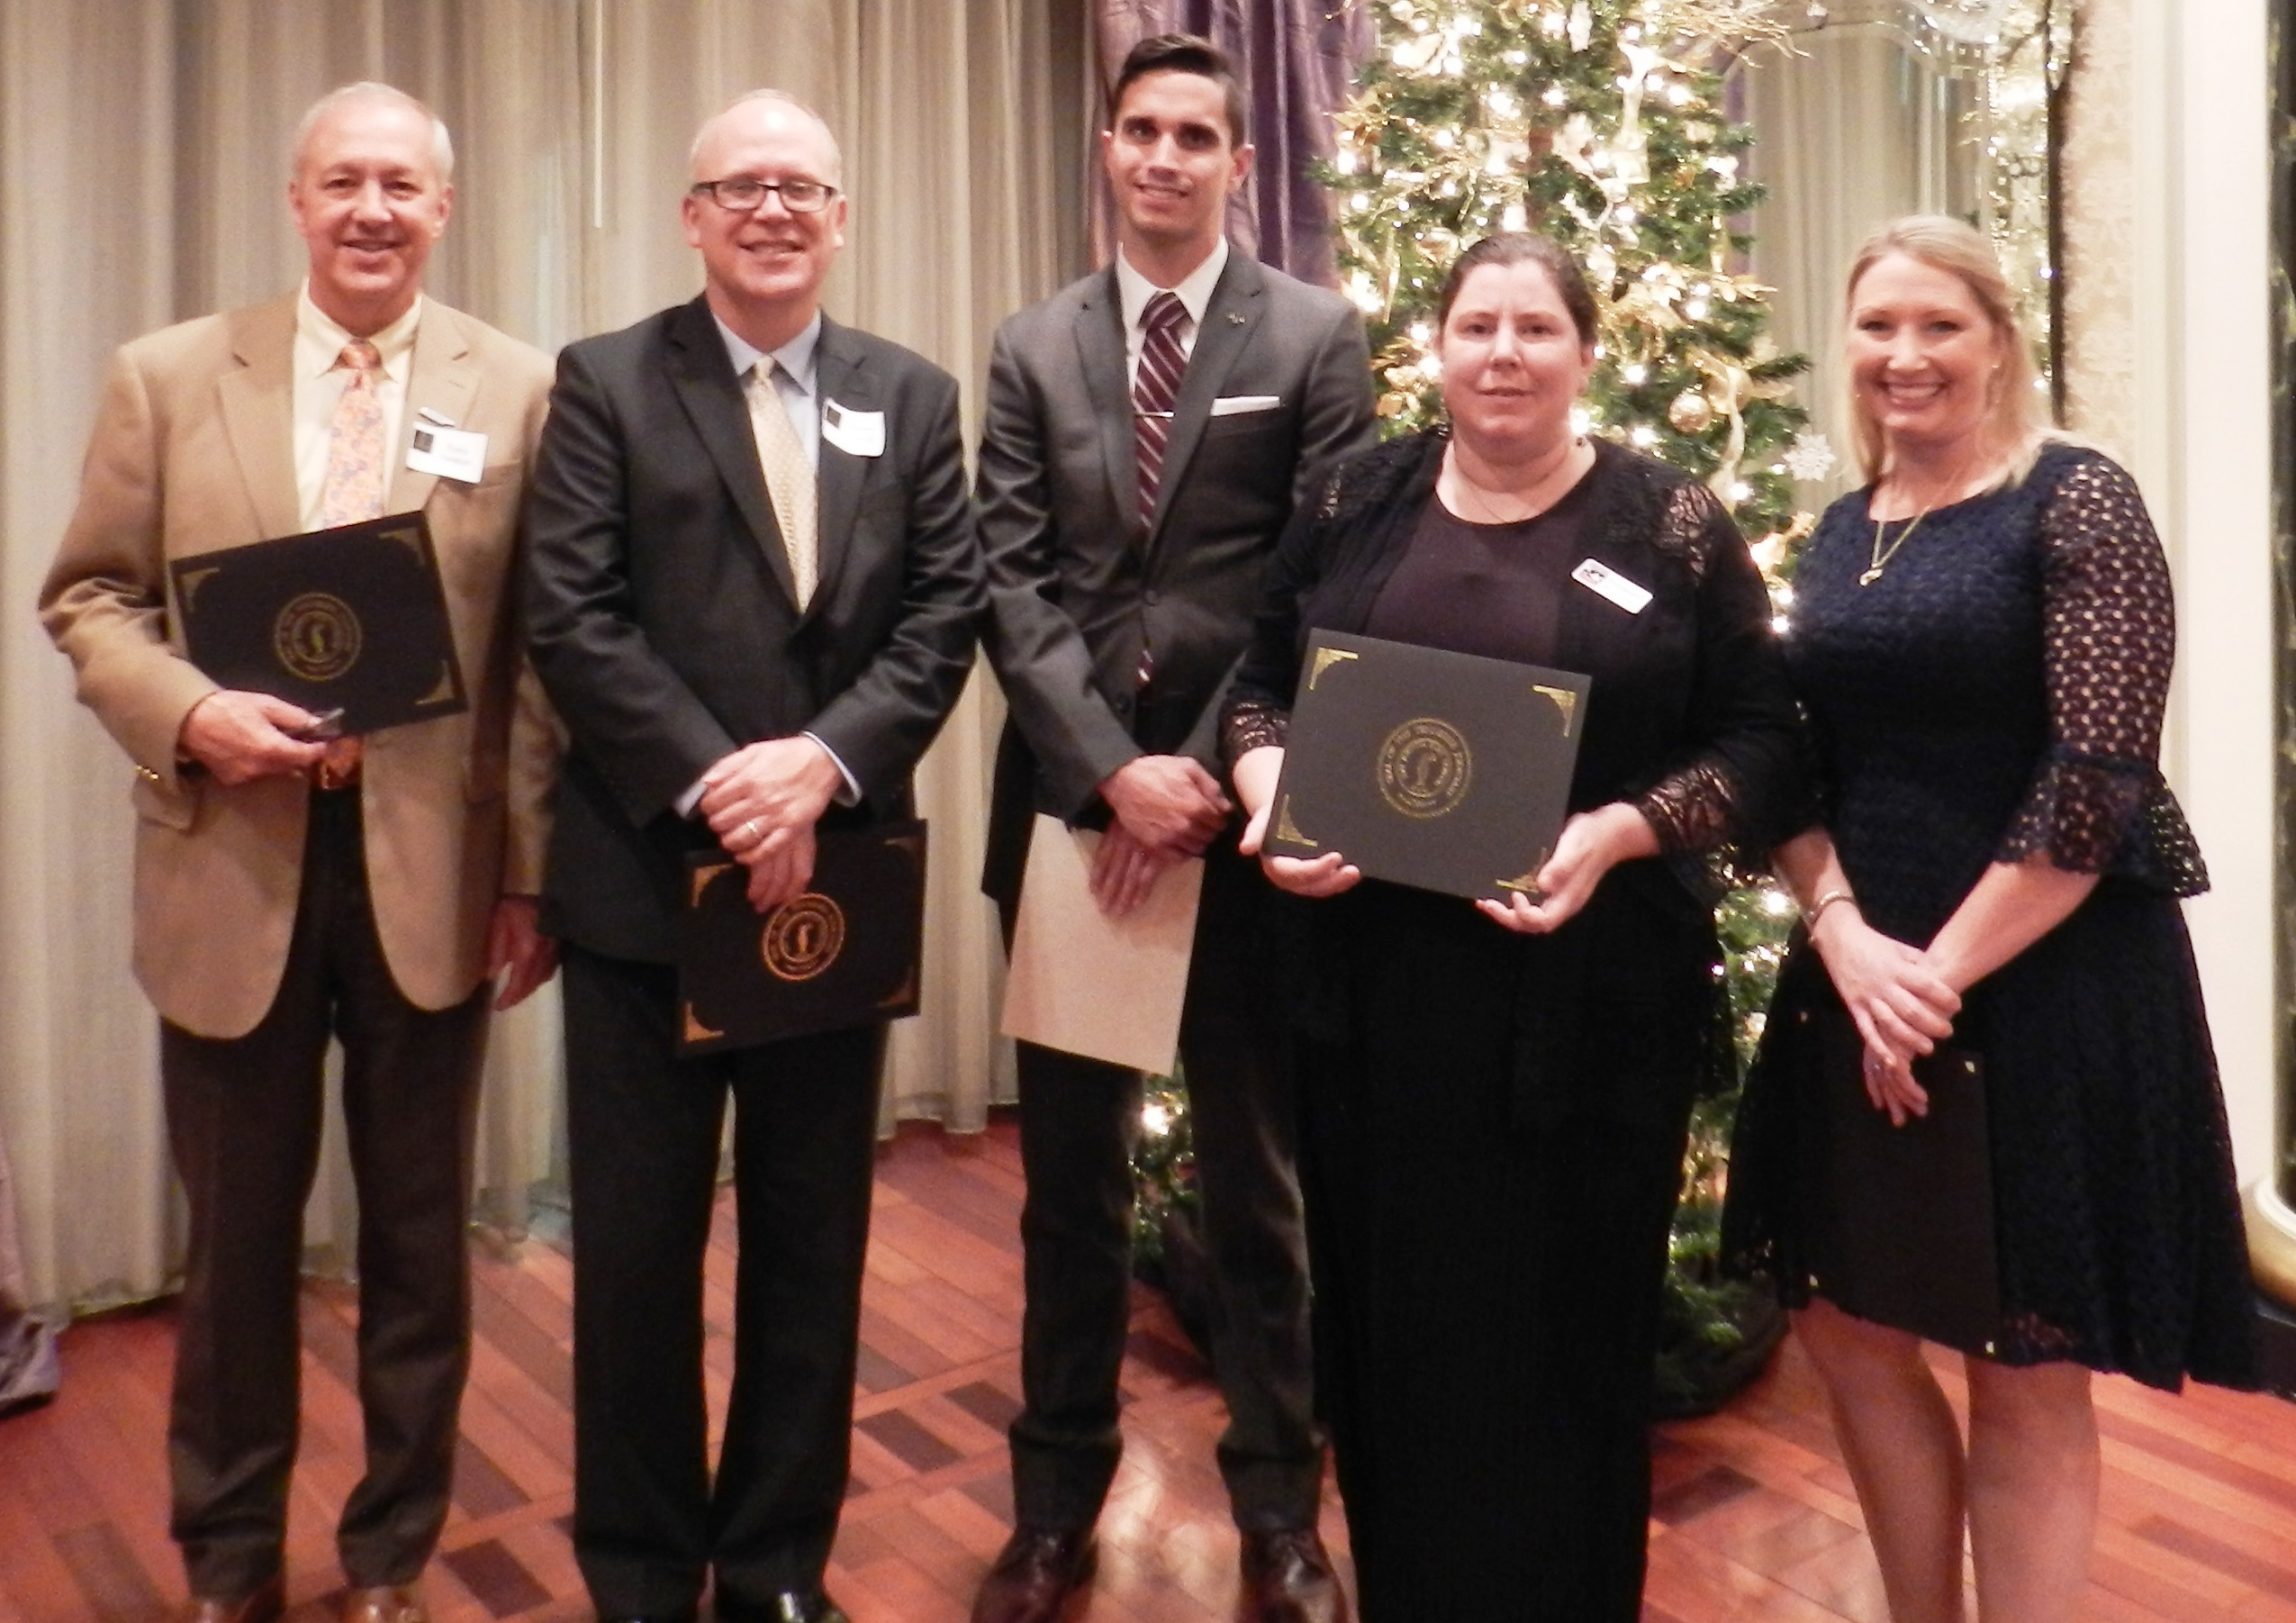 Attorneys who were recognized for pro bono work include Tony Seaton, Brent Young, Lawrence Scott Shults, Elizabeth McClellan, and Karen Turnage Boyd